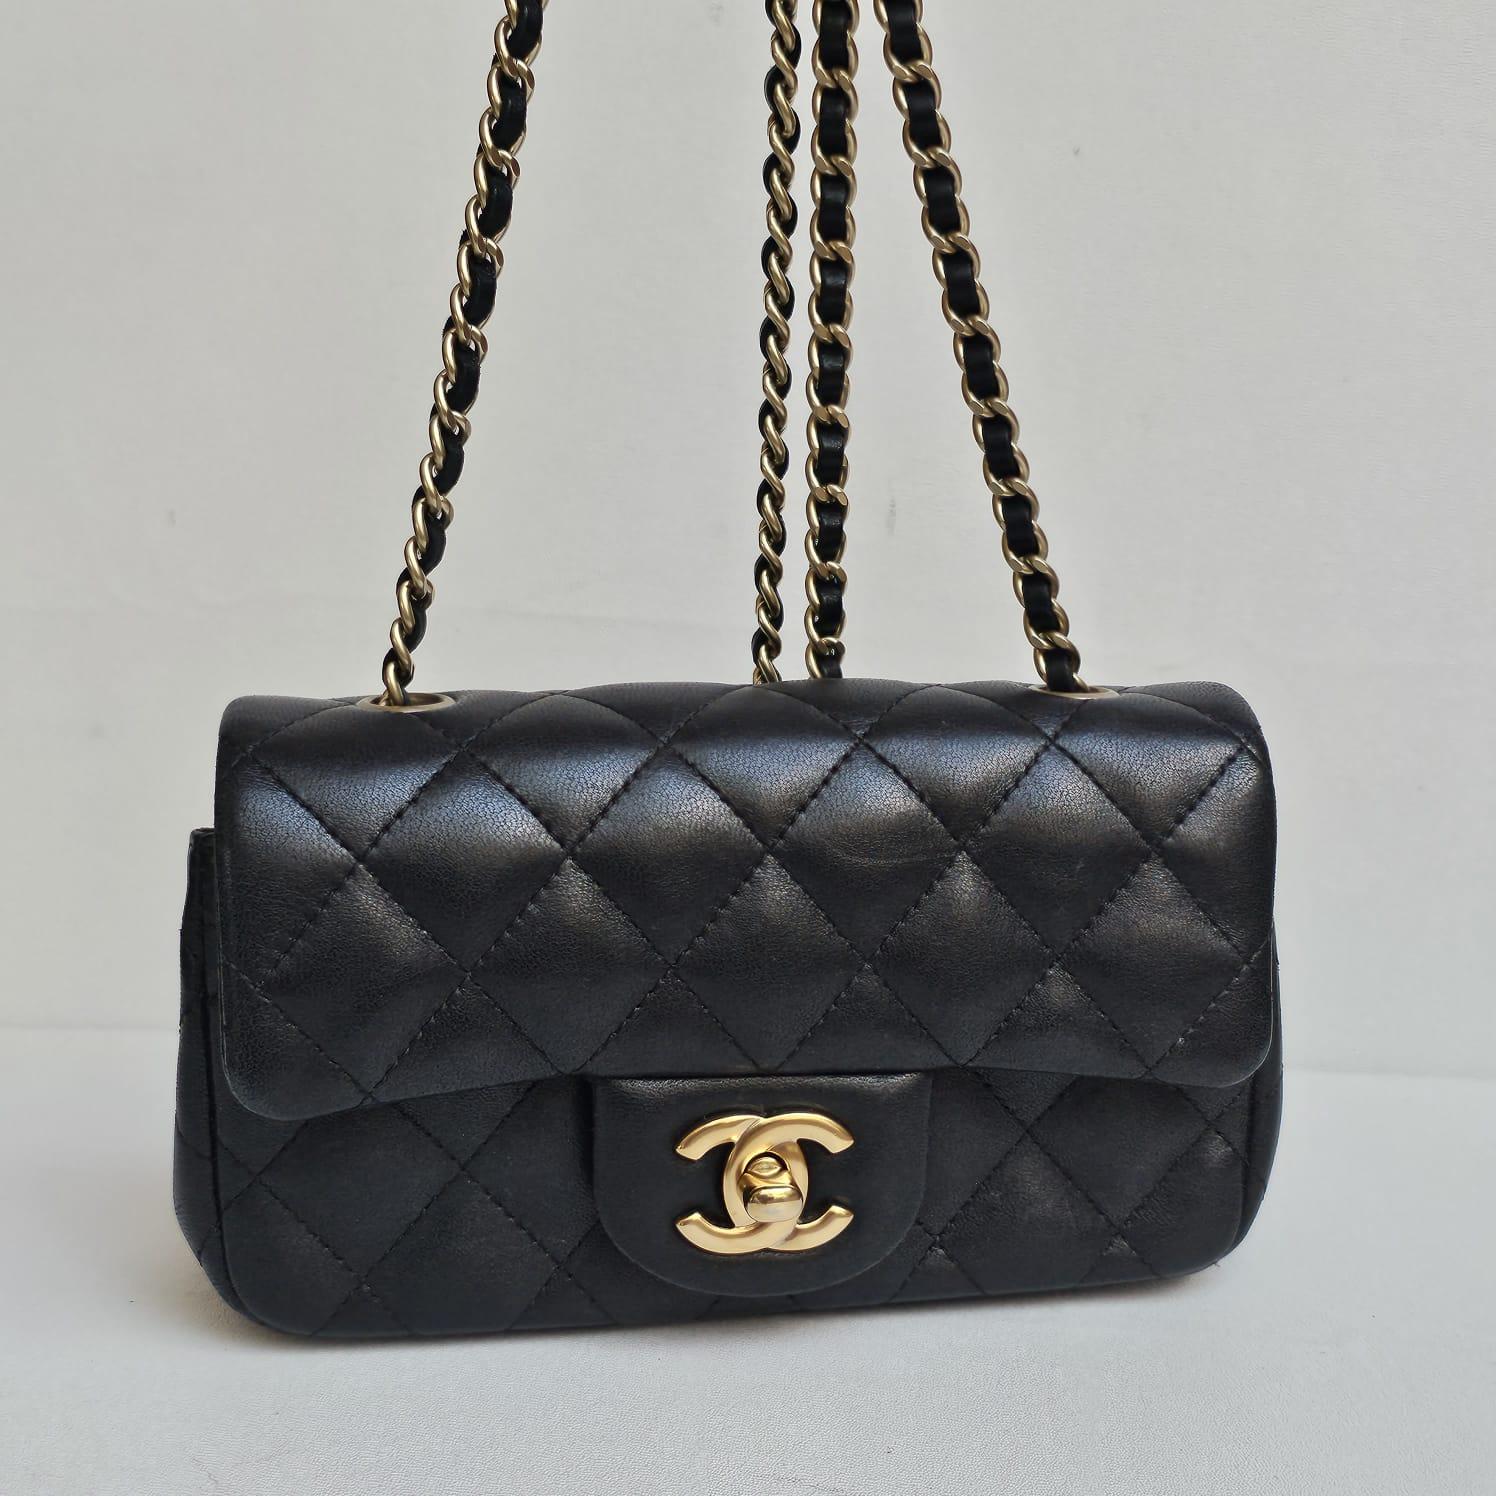 Chanel Black Lambskin Quilted Extra Mini Flap Bag For Sale 1